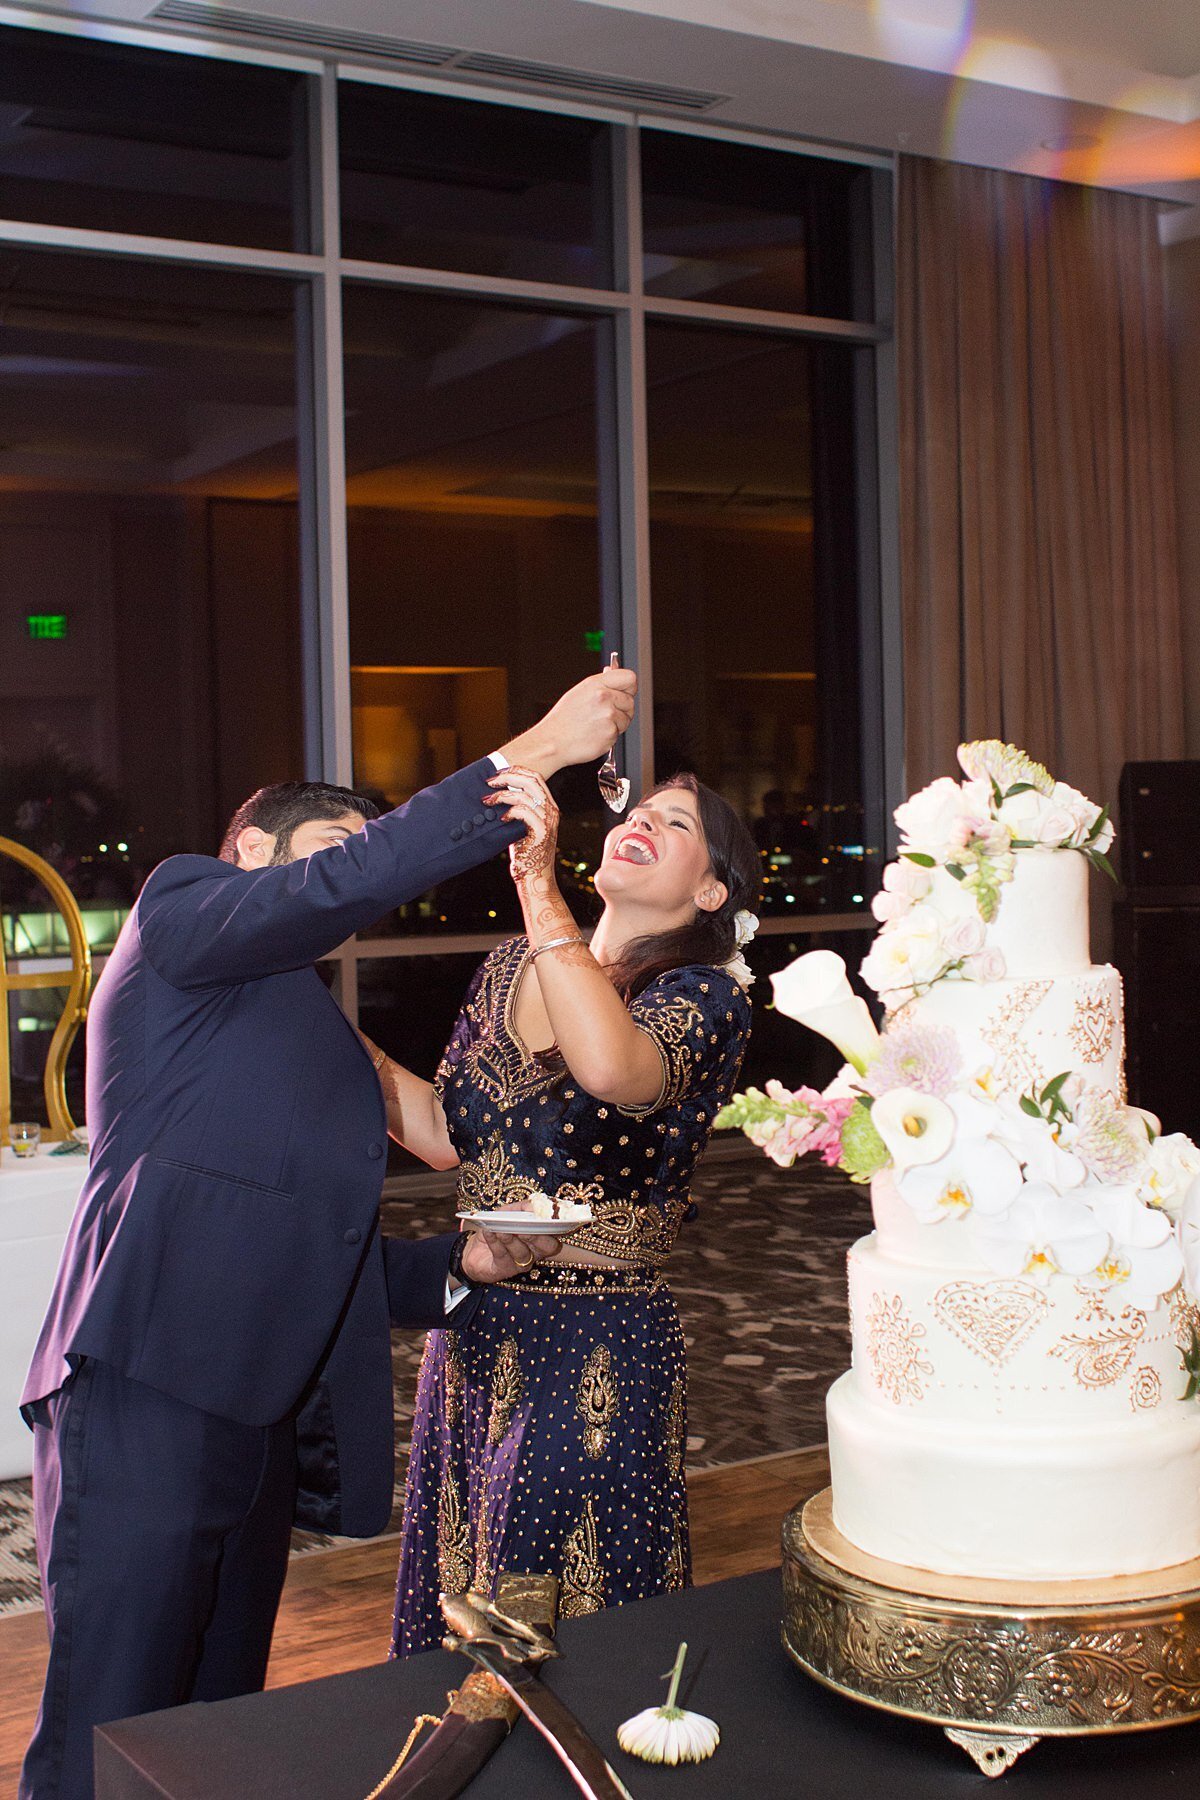 Indian Bride wearing a navy saree with gold detail and Hindu groom wearing a navy suit eat wedding cake. The Indian Wedding cake is white fondant with gold mandala detail and white orchids sitting on a gold cake stand.